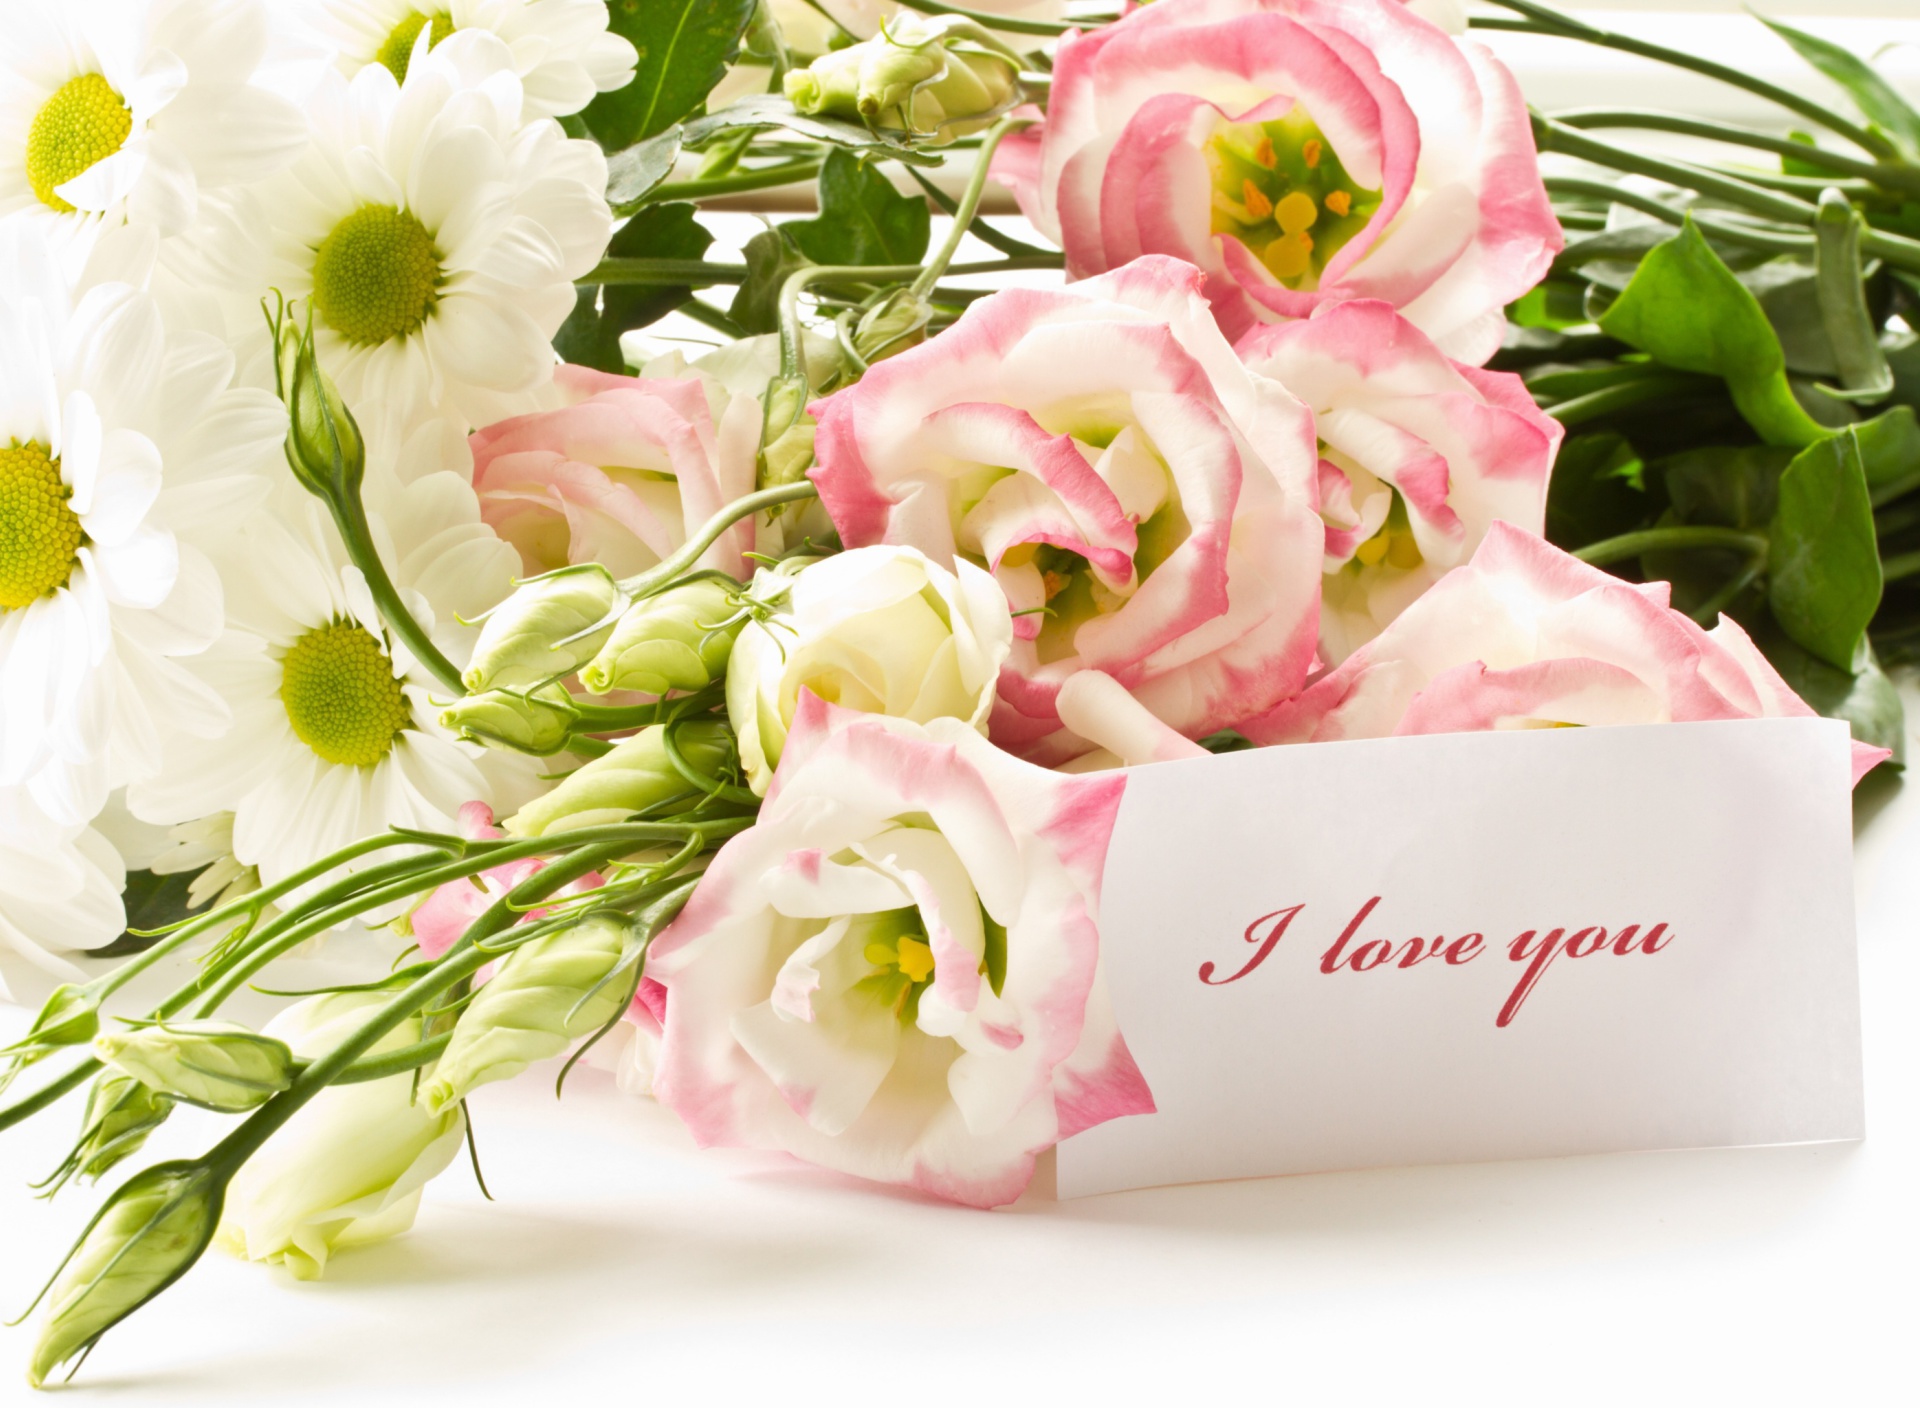 Das Bouquet of daisies and roses Wallpaper 1920x1408